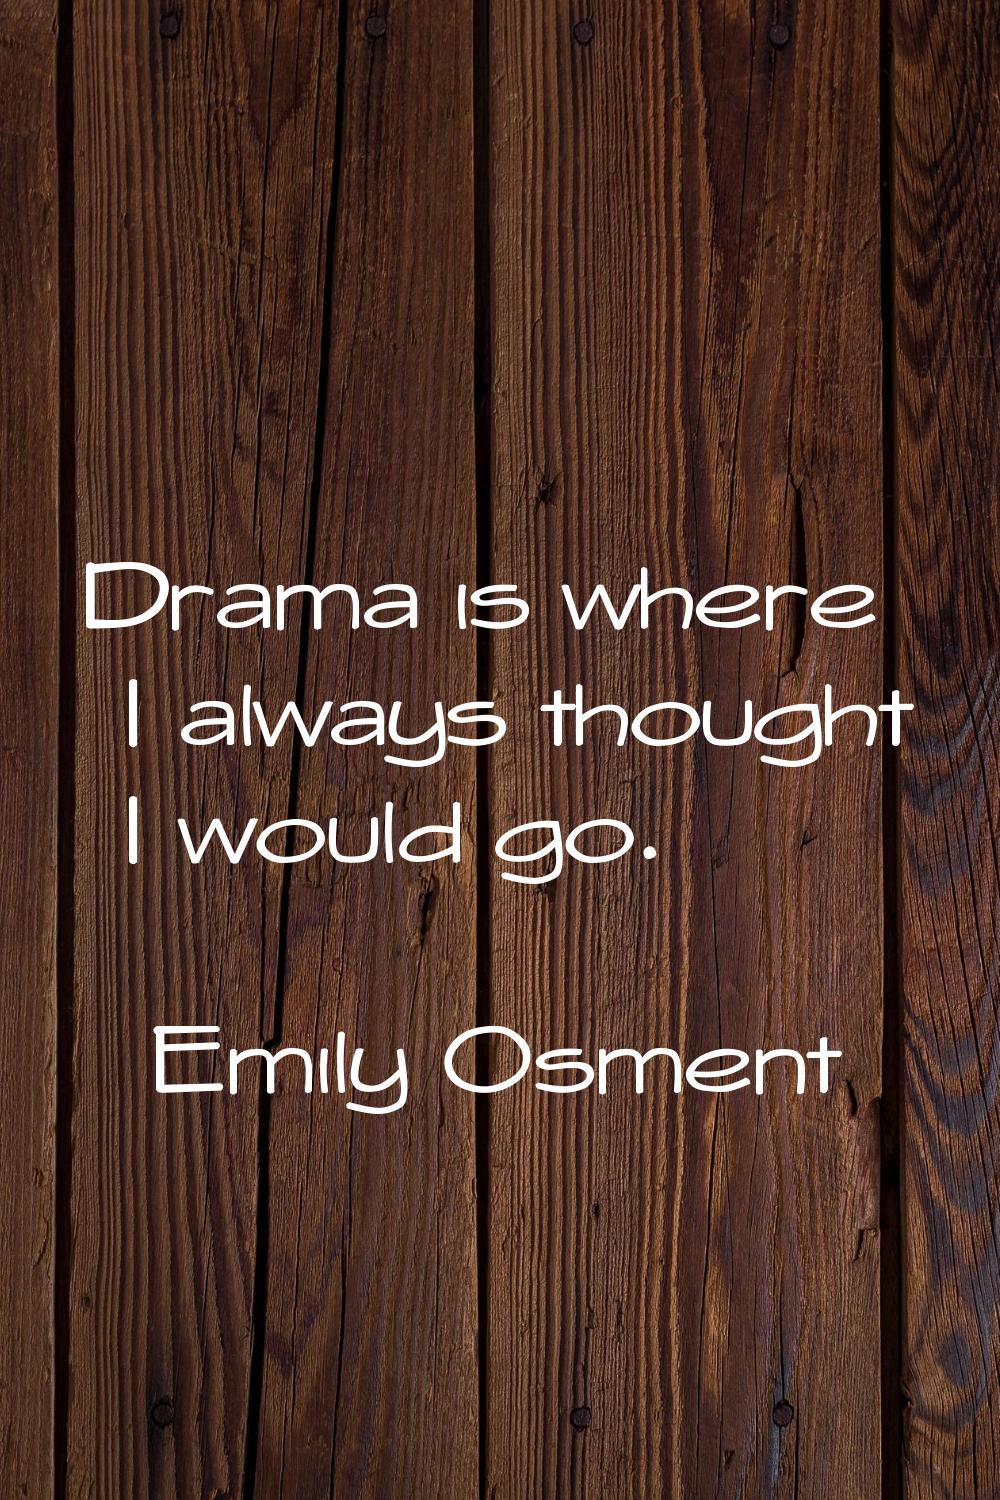 Drama is where I always thought I would go.